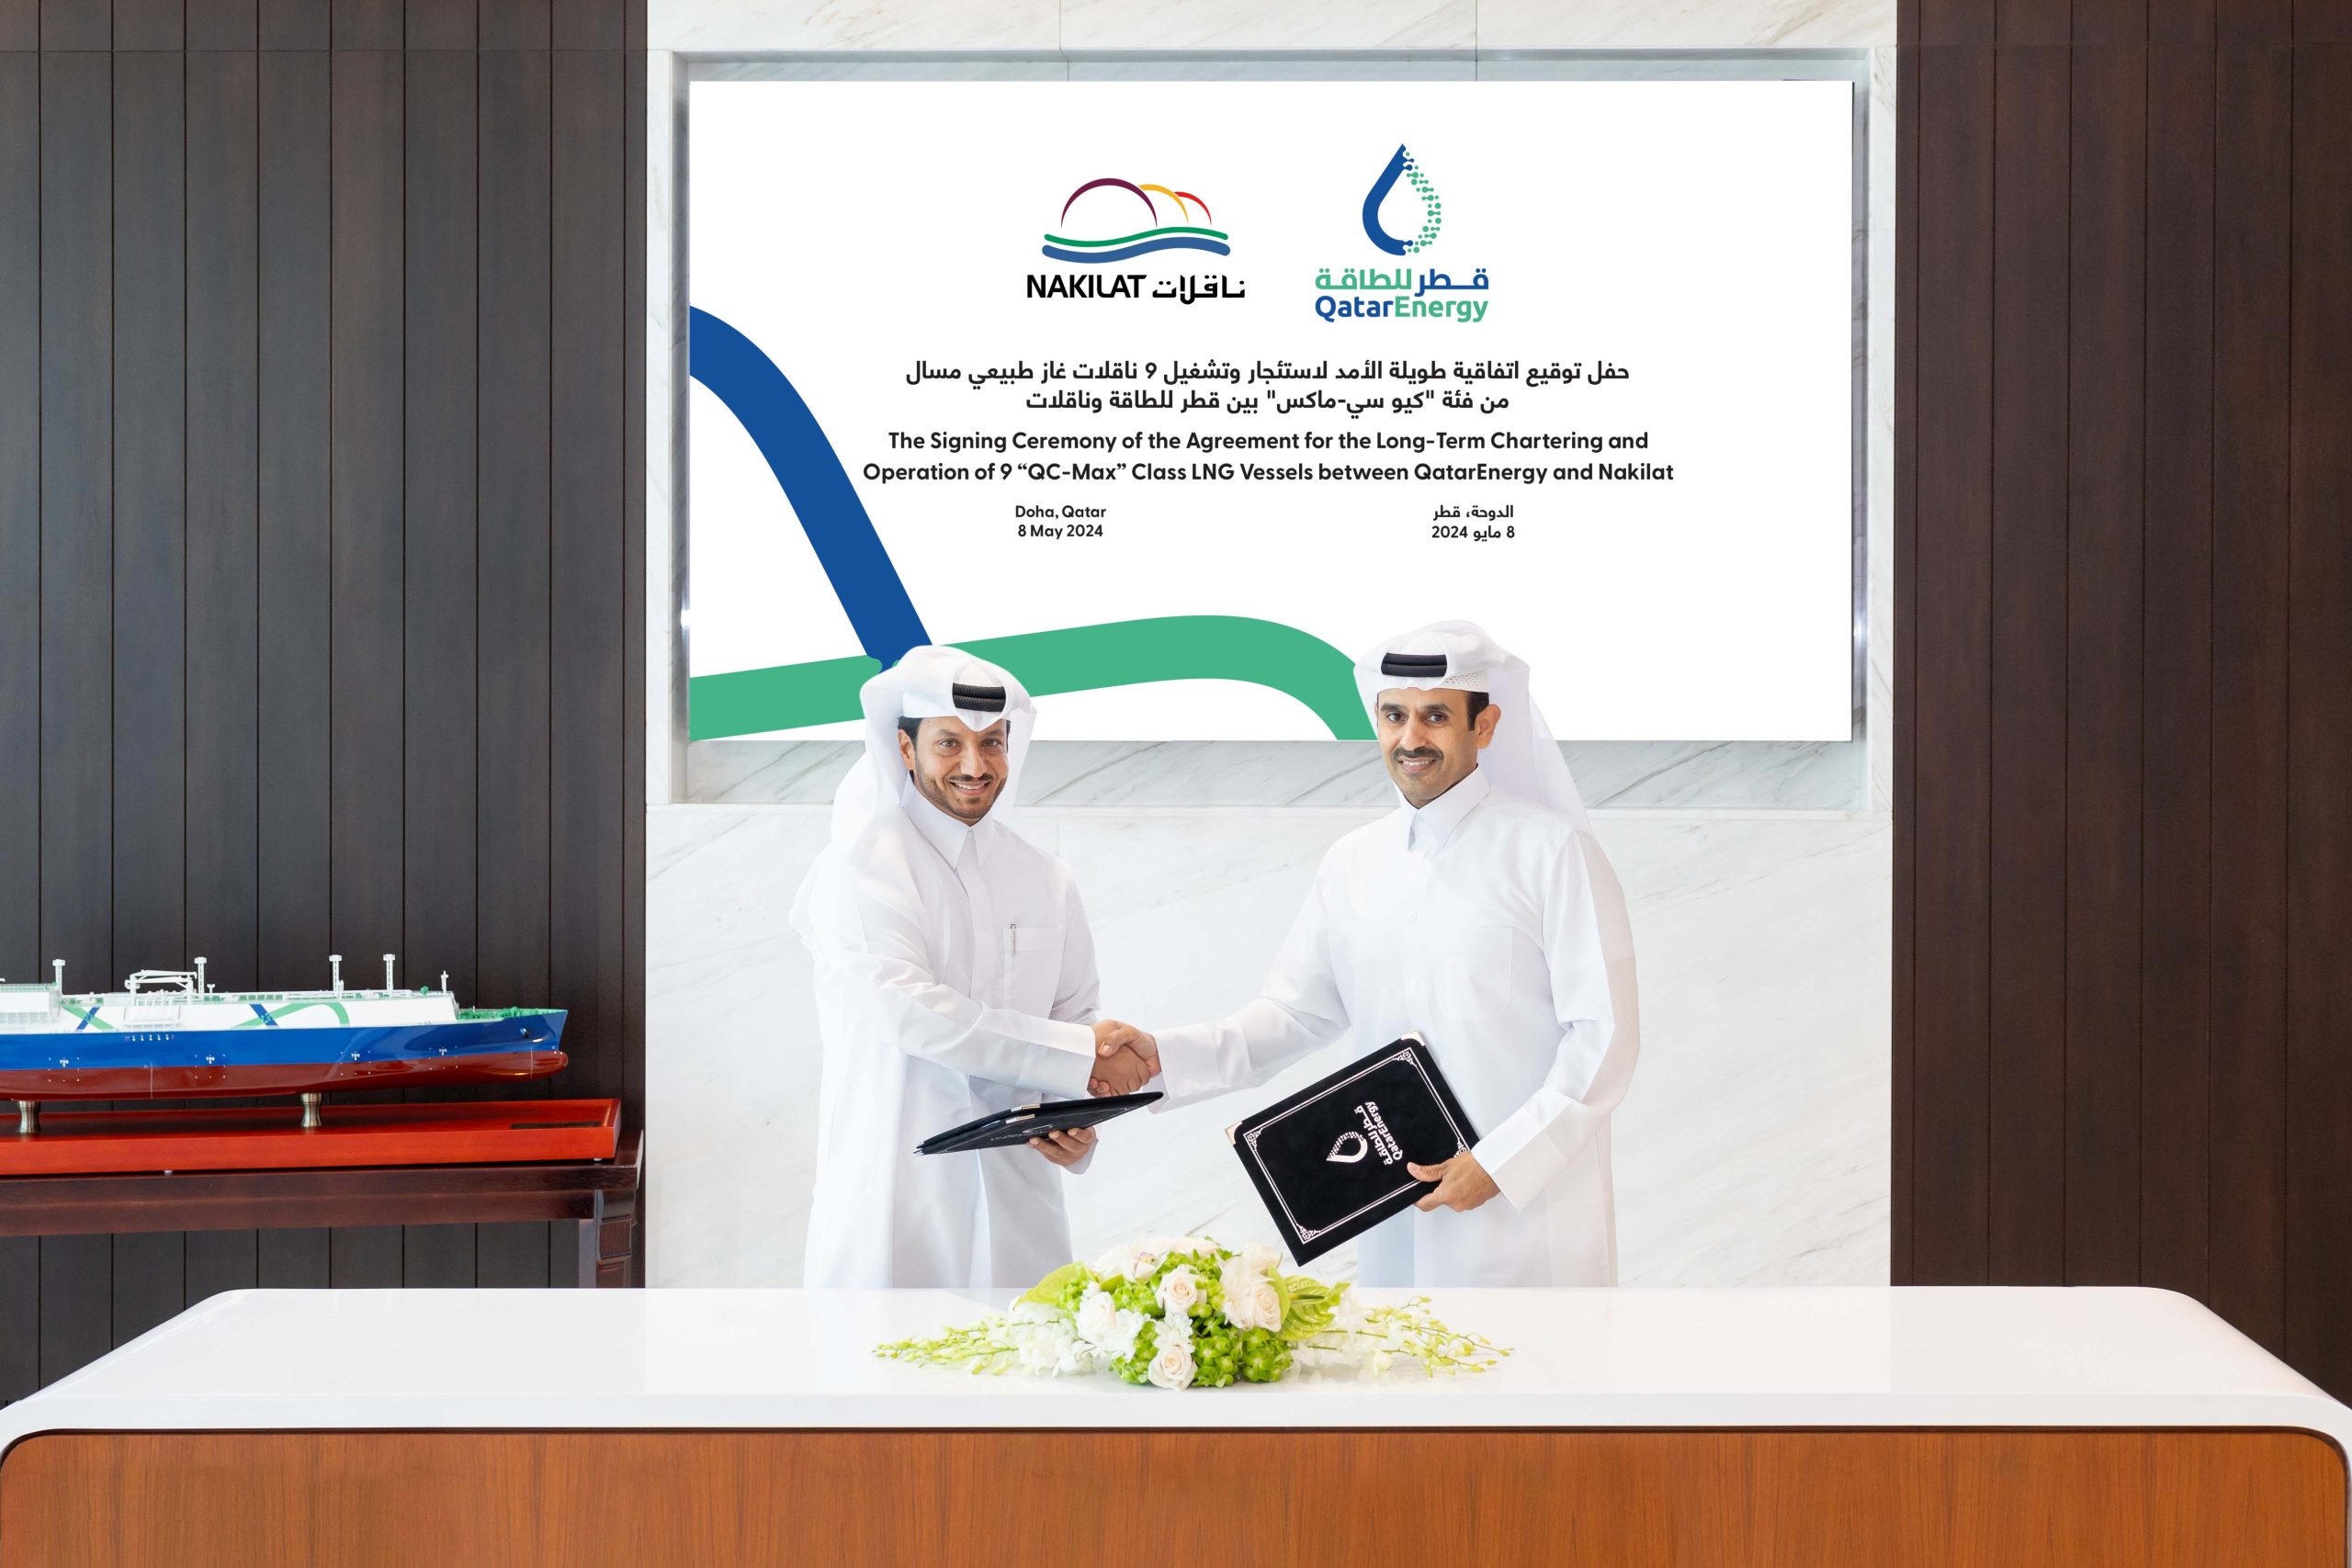 QatarEnergy, Nakilat sign long-term agreement to charter and operate 9 QC-Max class LNG vessels